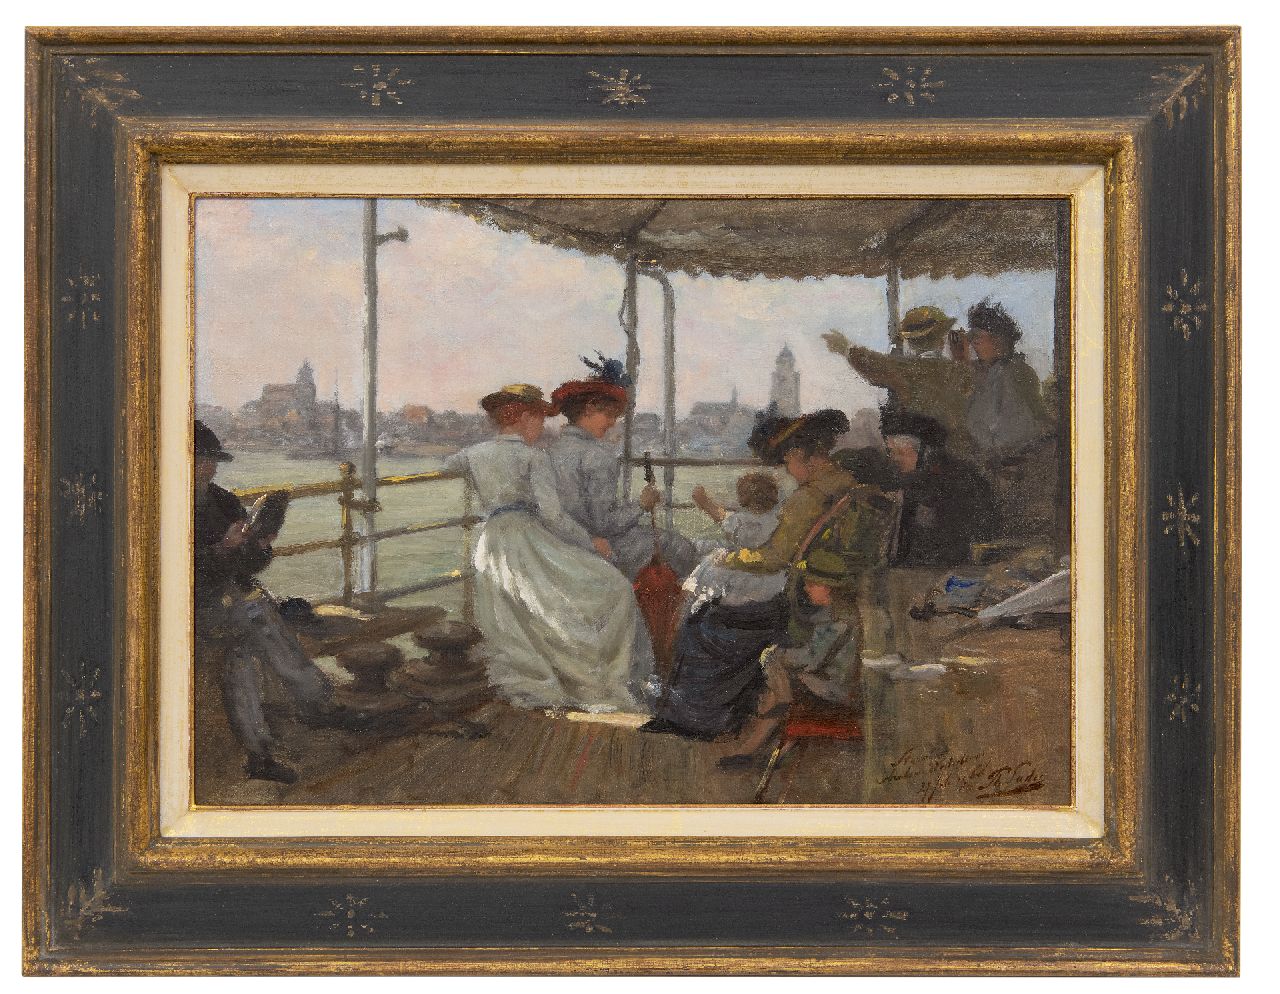 Sadée P.L.J.F.  | Philip Lodewijk Jacob Frederik Sadée, Daytrip on the steamship from Arnhem to the Westerbouwing, oil on canvas laid down on panel 34.6 x 50.0 cm, signed l.r. and dated 27 juli 1900